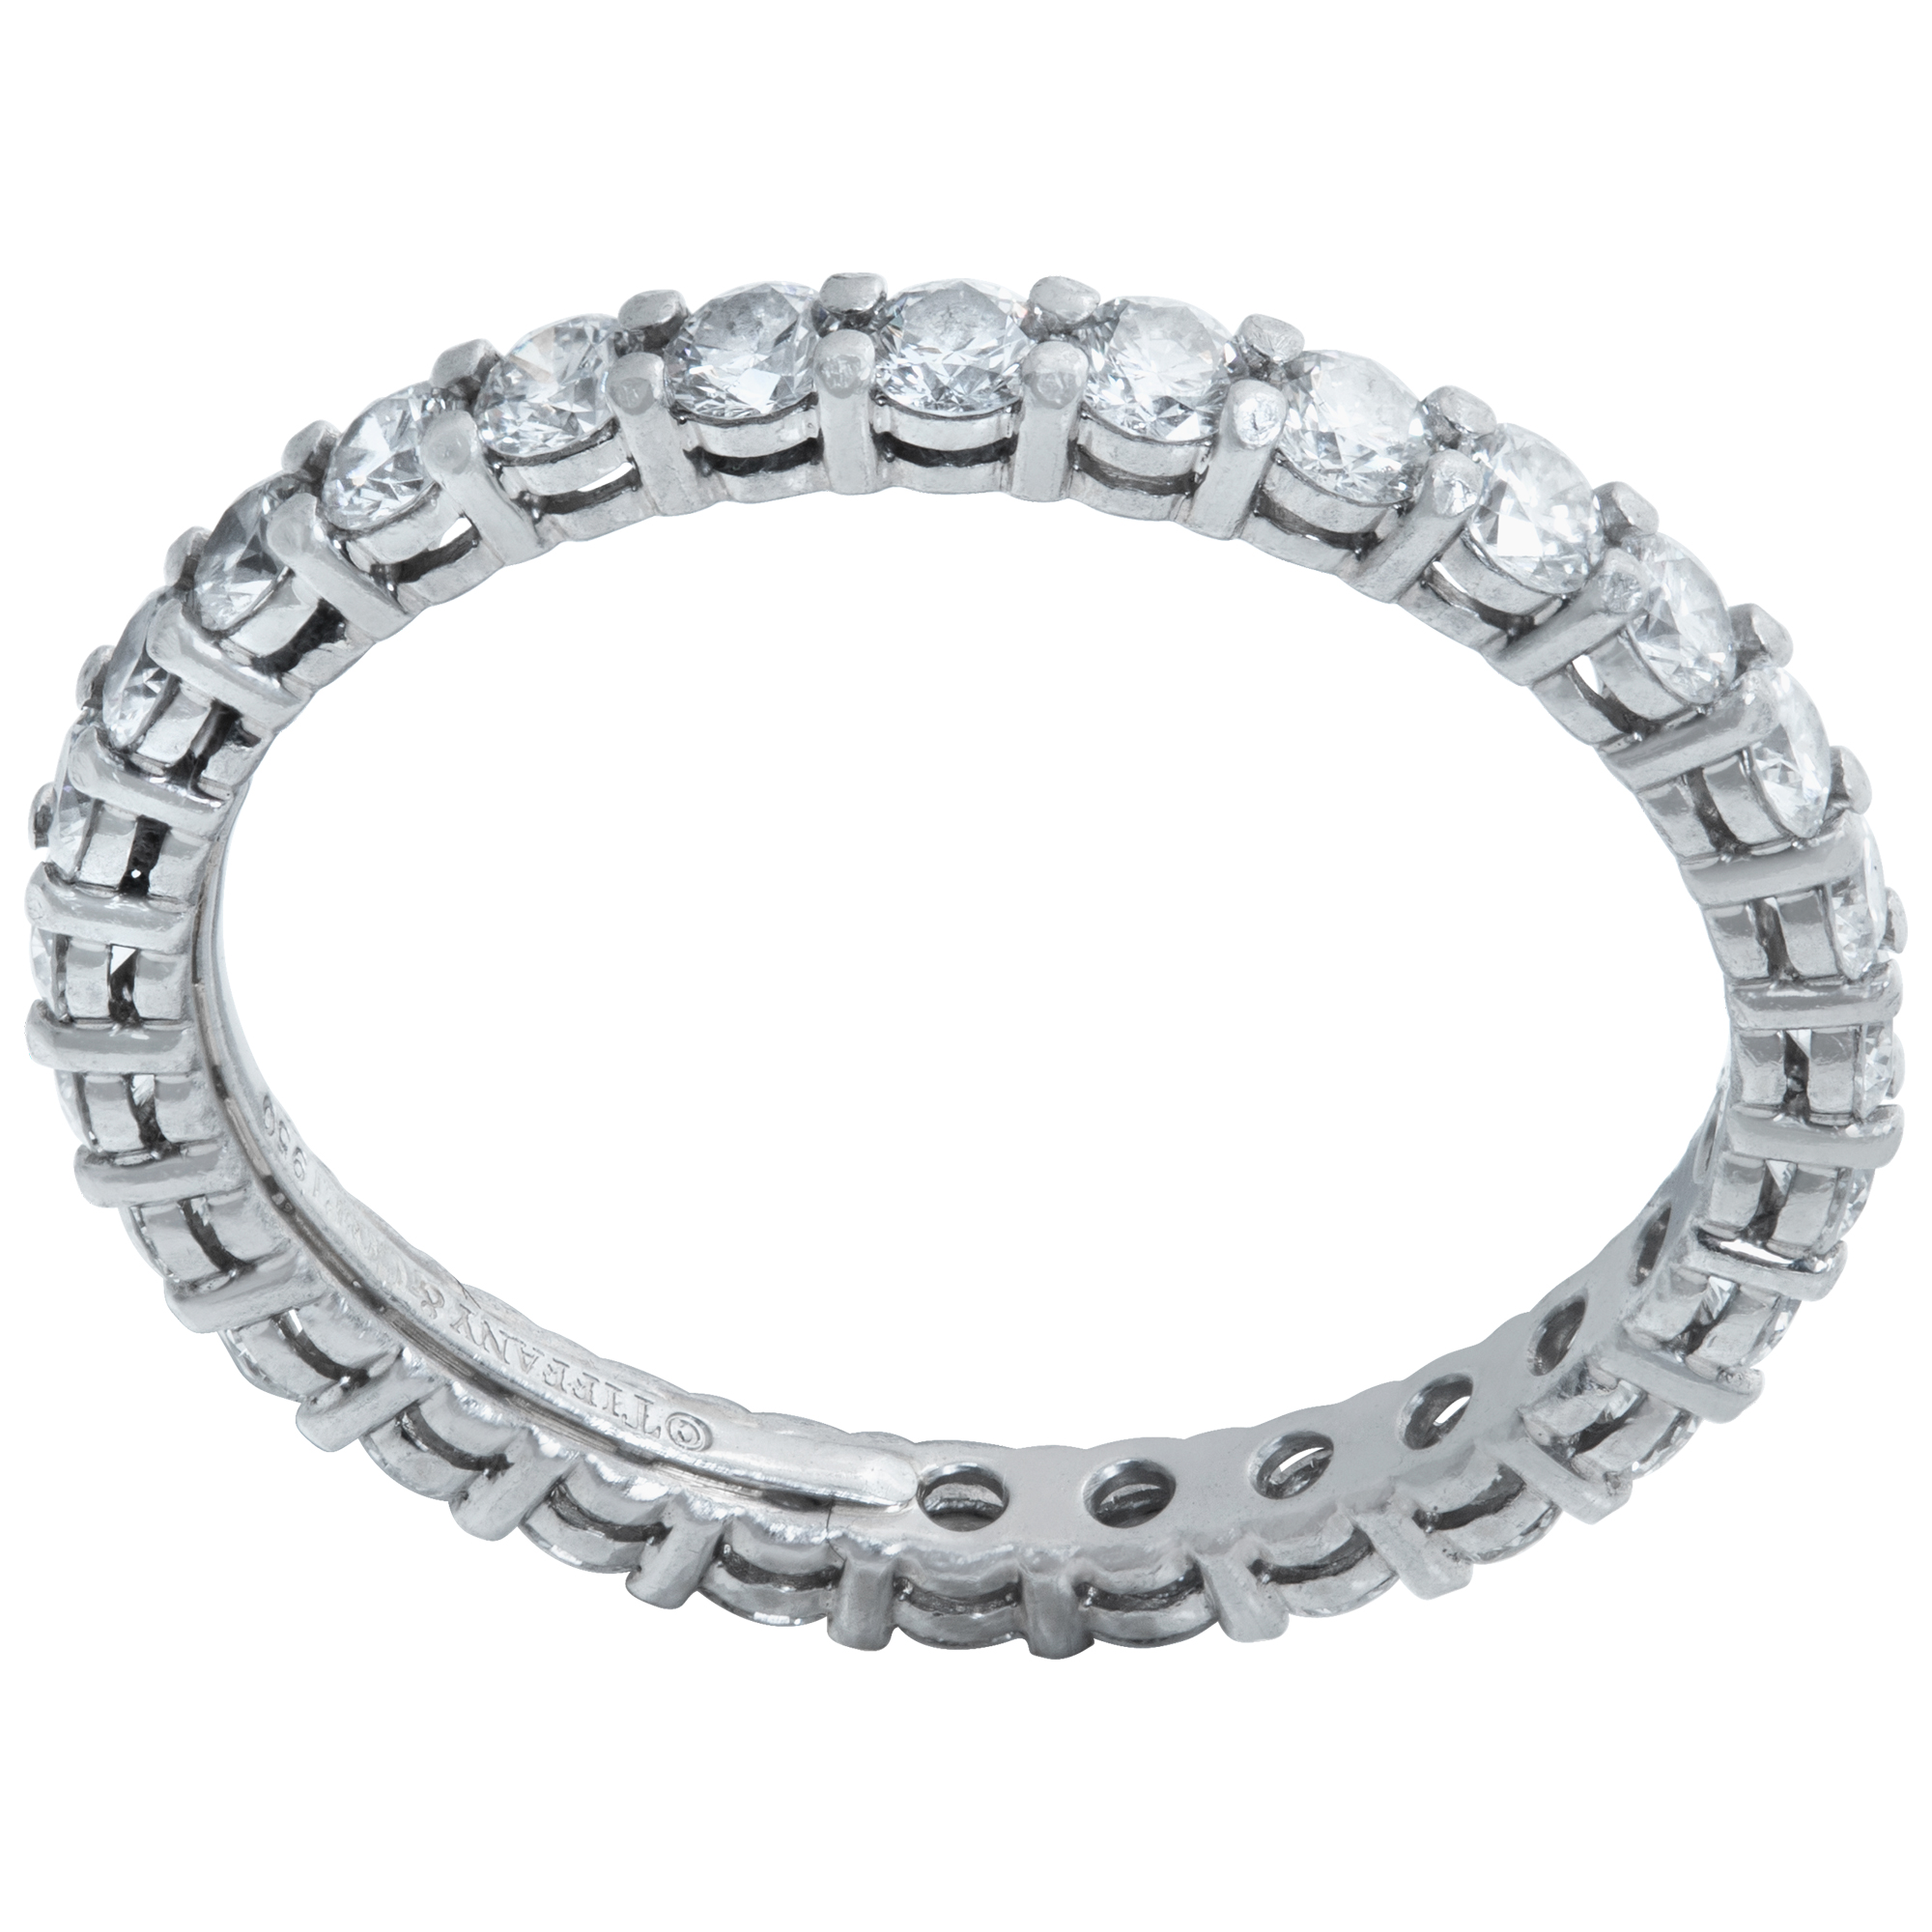 Tiffany & Co. Forever band ring in platinum with a full circle of diamonds, 0.85 carats, G color, VS clarity, size 6.5